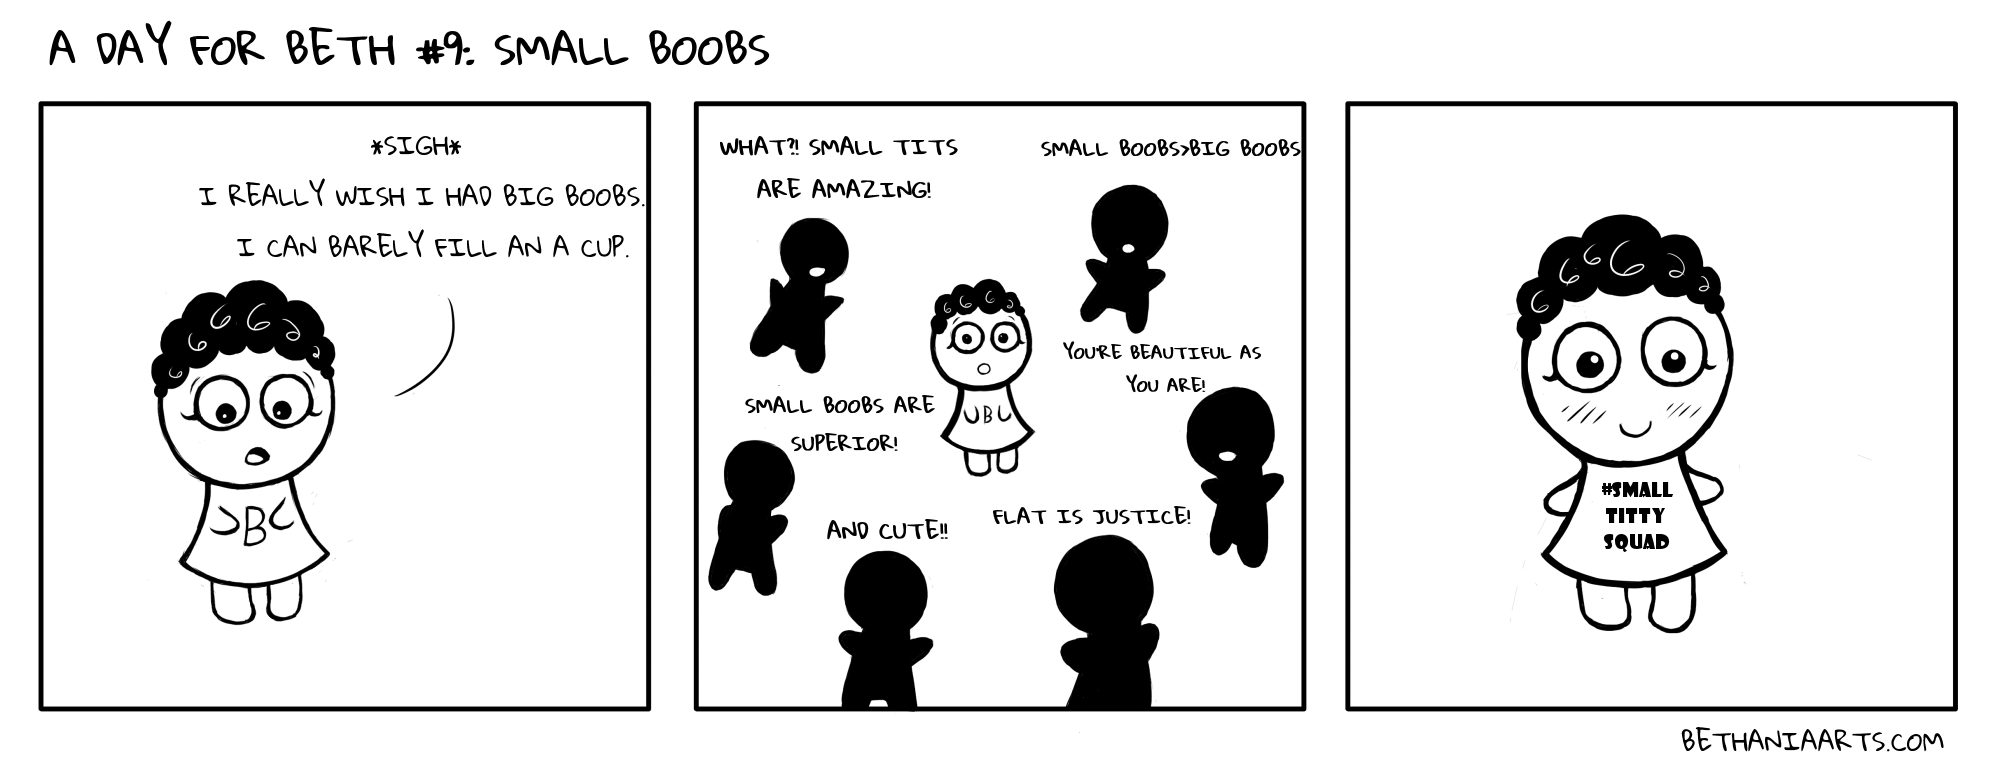 A Day For Beth #9: Small Boobs